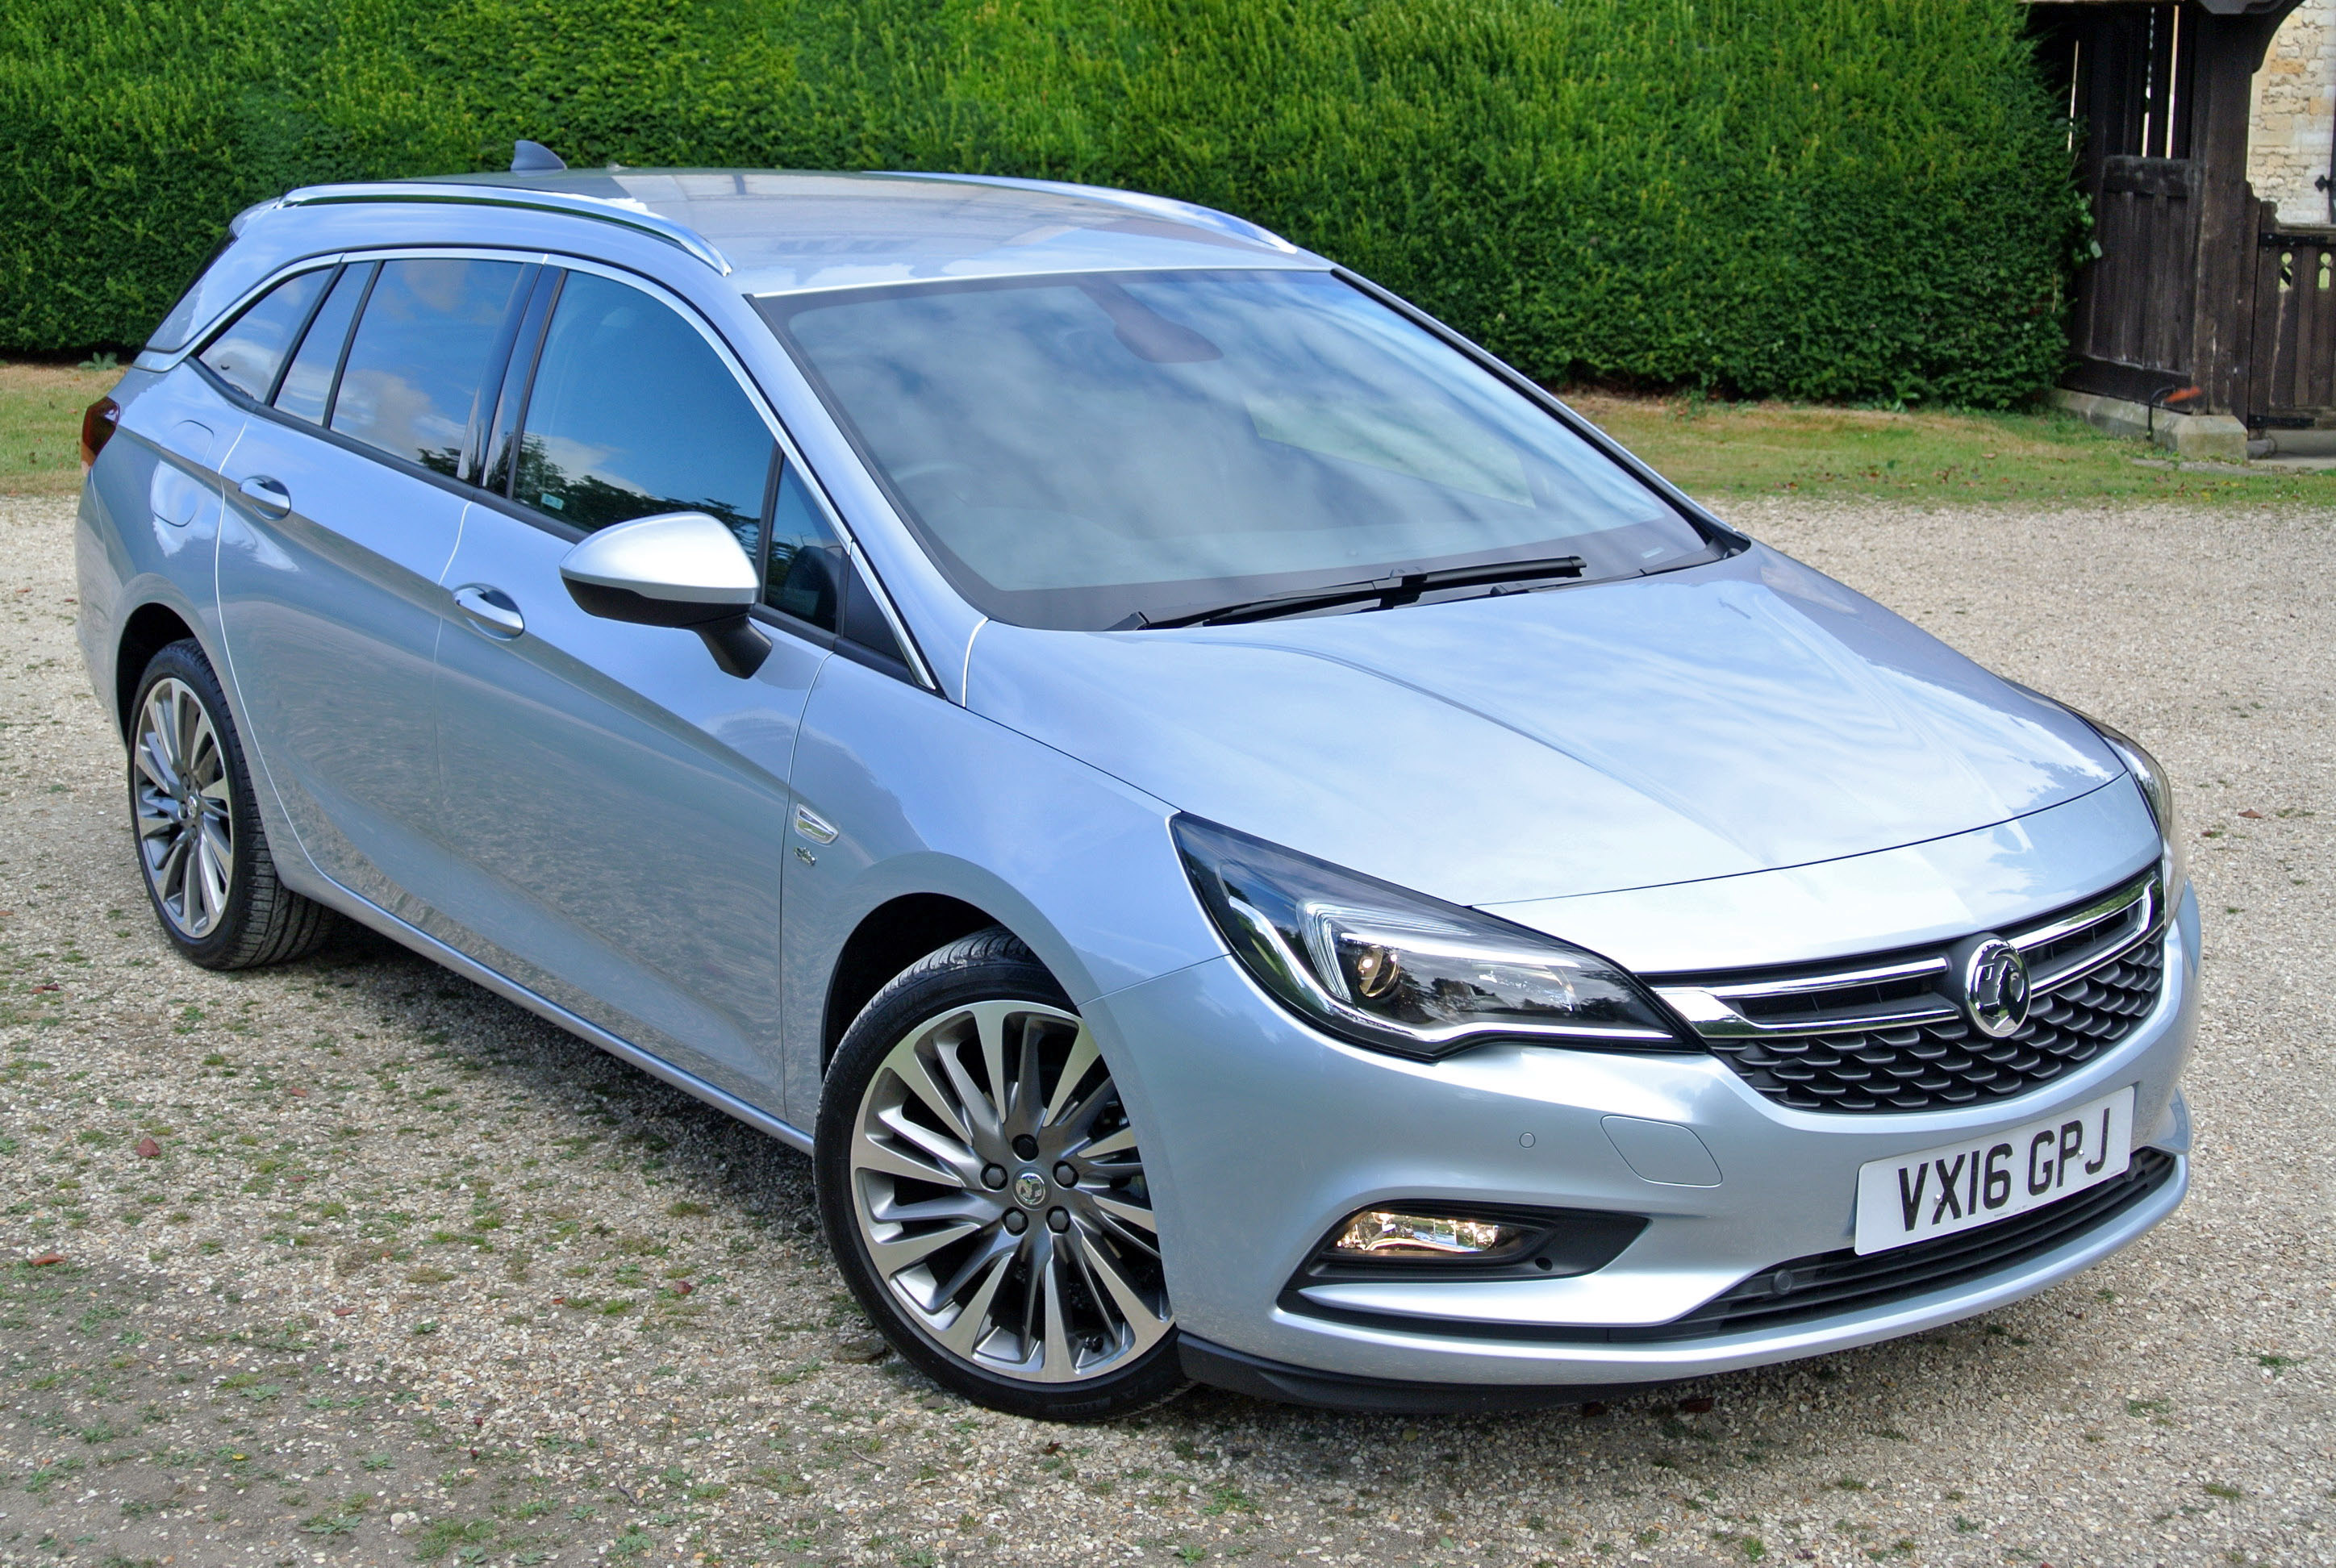 Where space is a monster issue, the Vauxhall Astra Estate wins